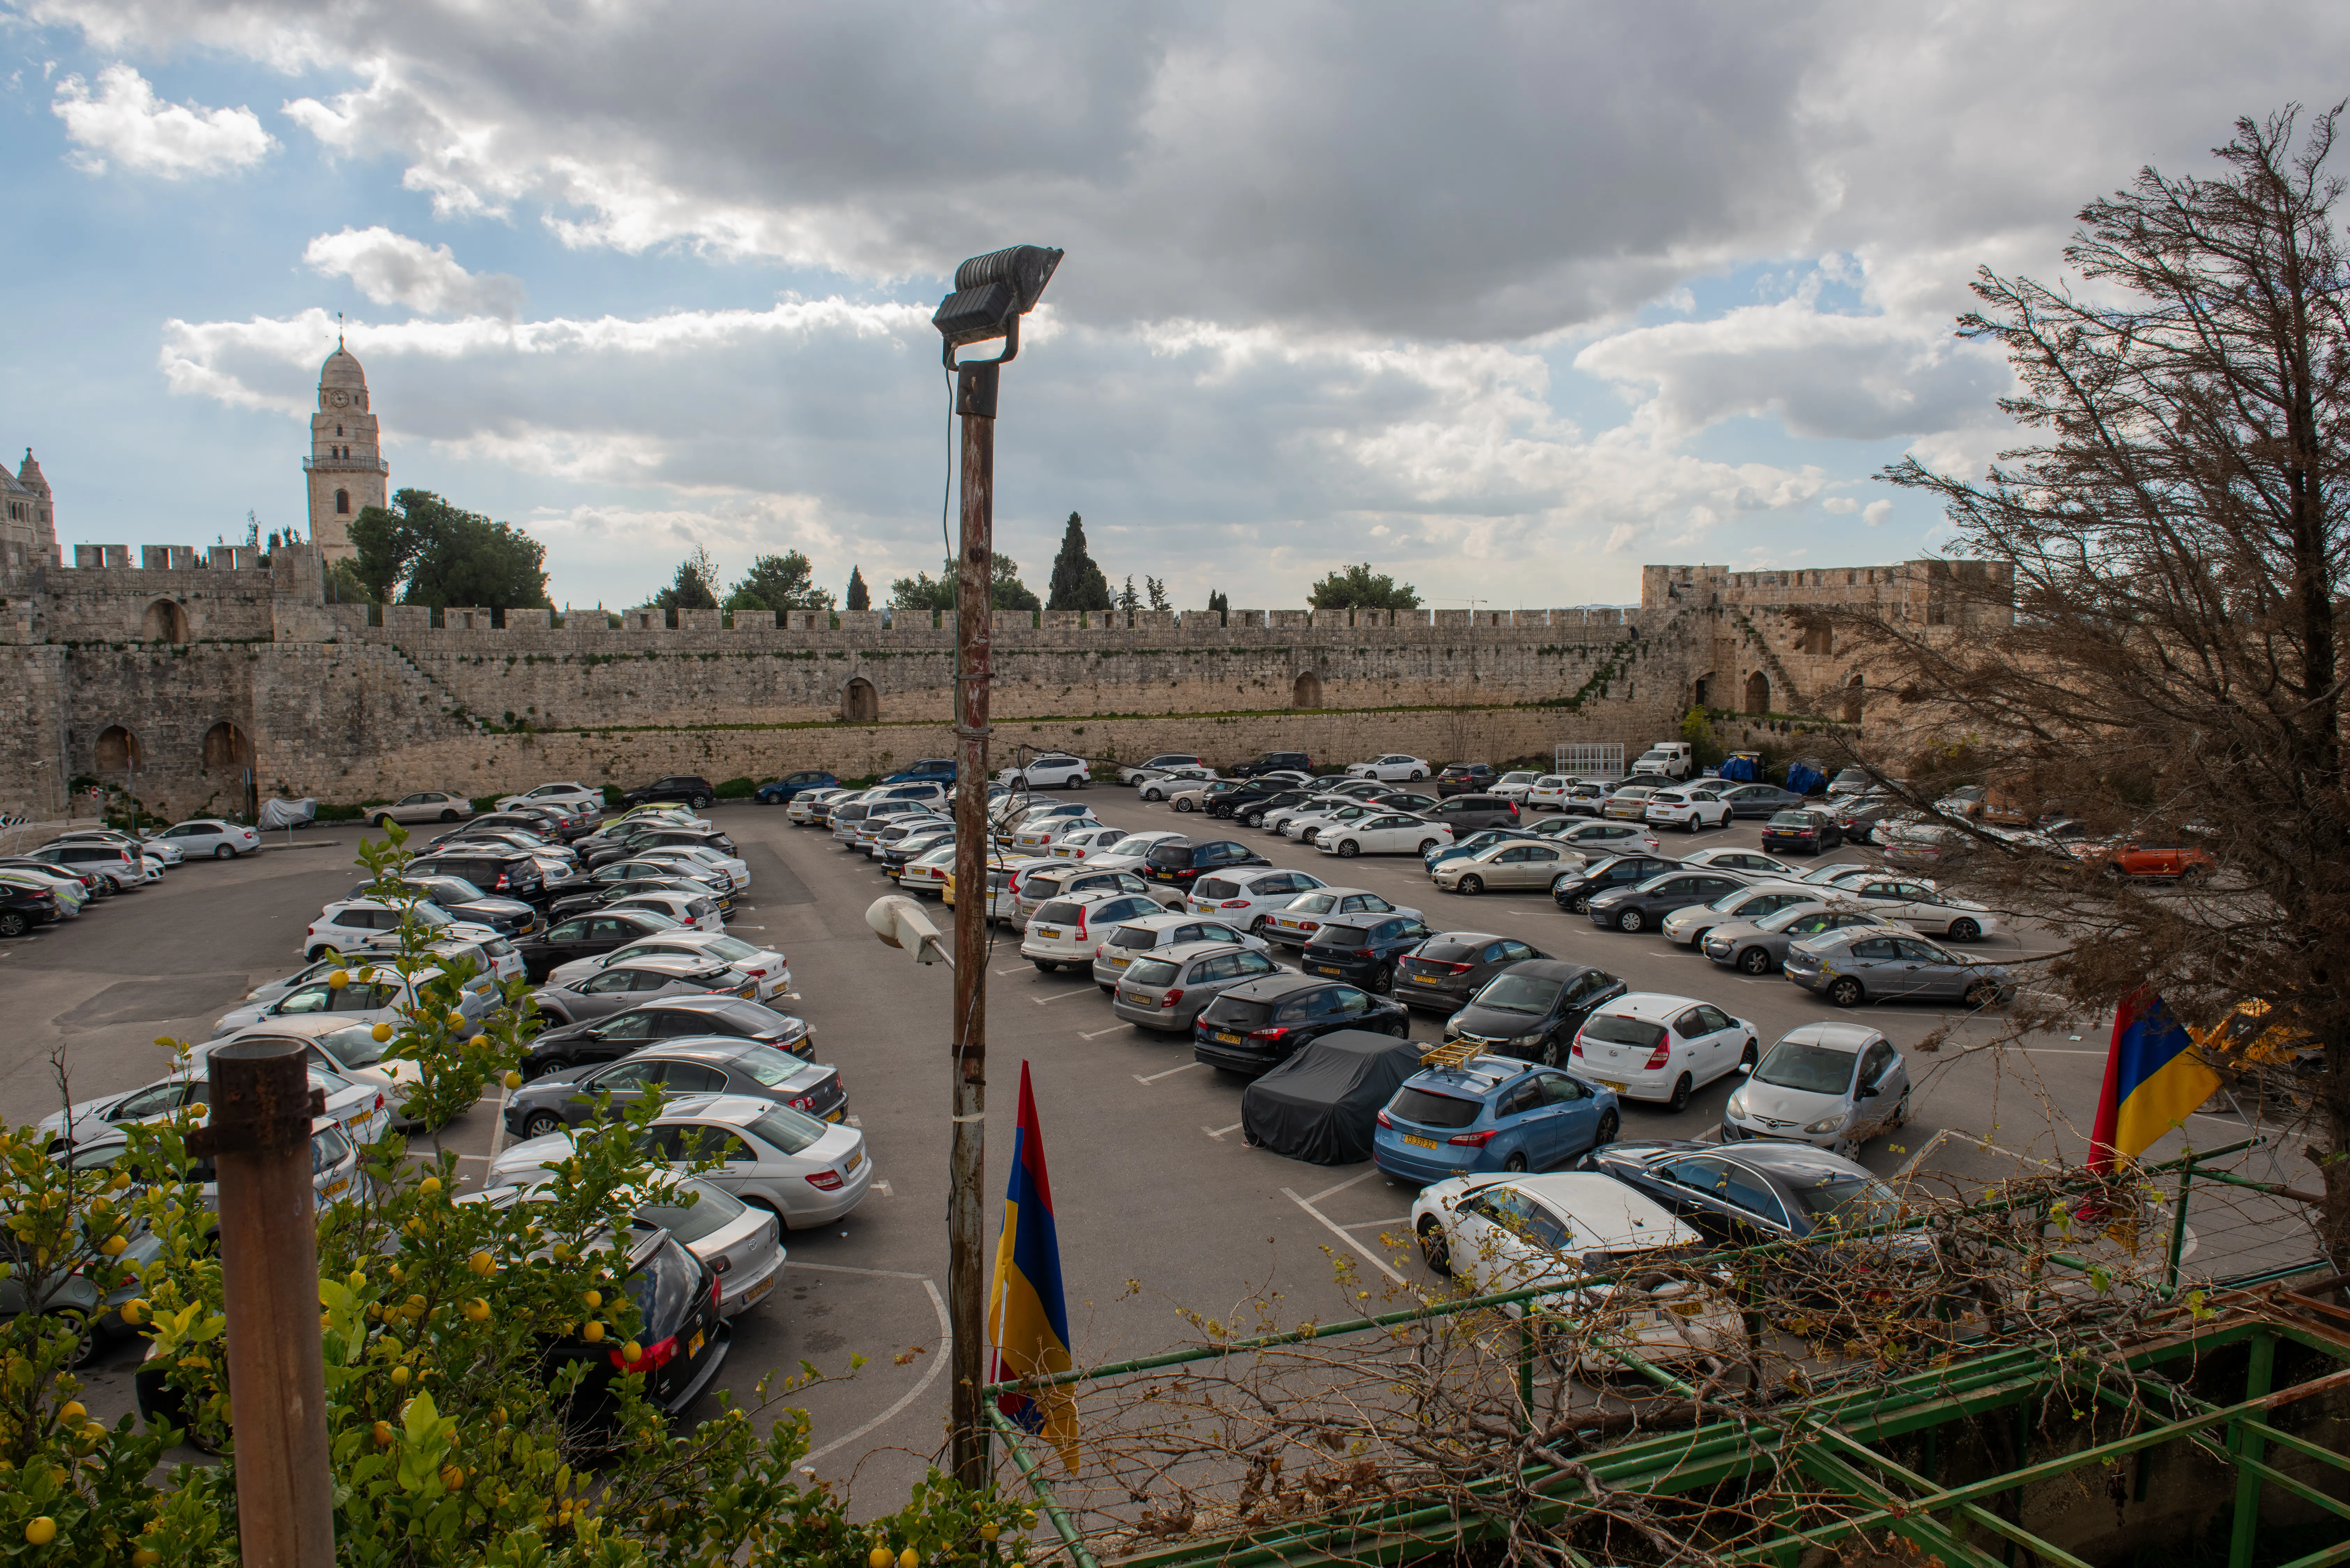 The area known as Cows' Garden in the Armenian Quarter in the Old City of Jerusalem, seen from above. Currently, it serves as a parking lot. The area, together with some other Armenian properties, is at the center of an economic and judicial dispute after a lease deal was signed between the Armenian Patriarchate and the real estate company Xana Garden. Credit: Marinella Bandini